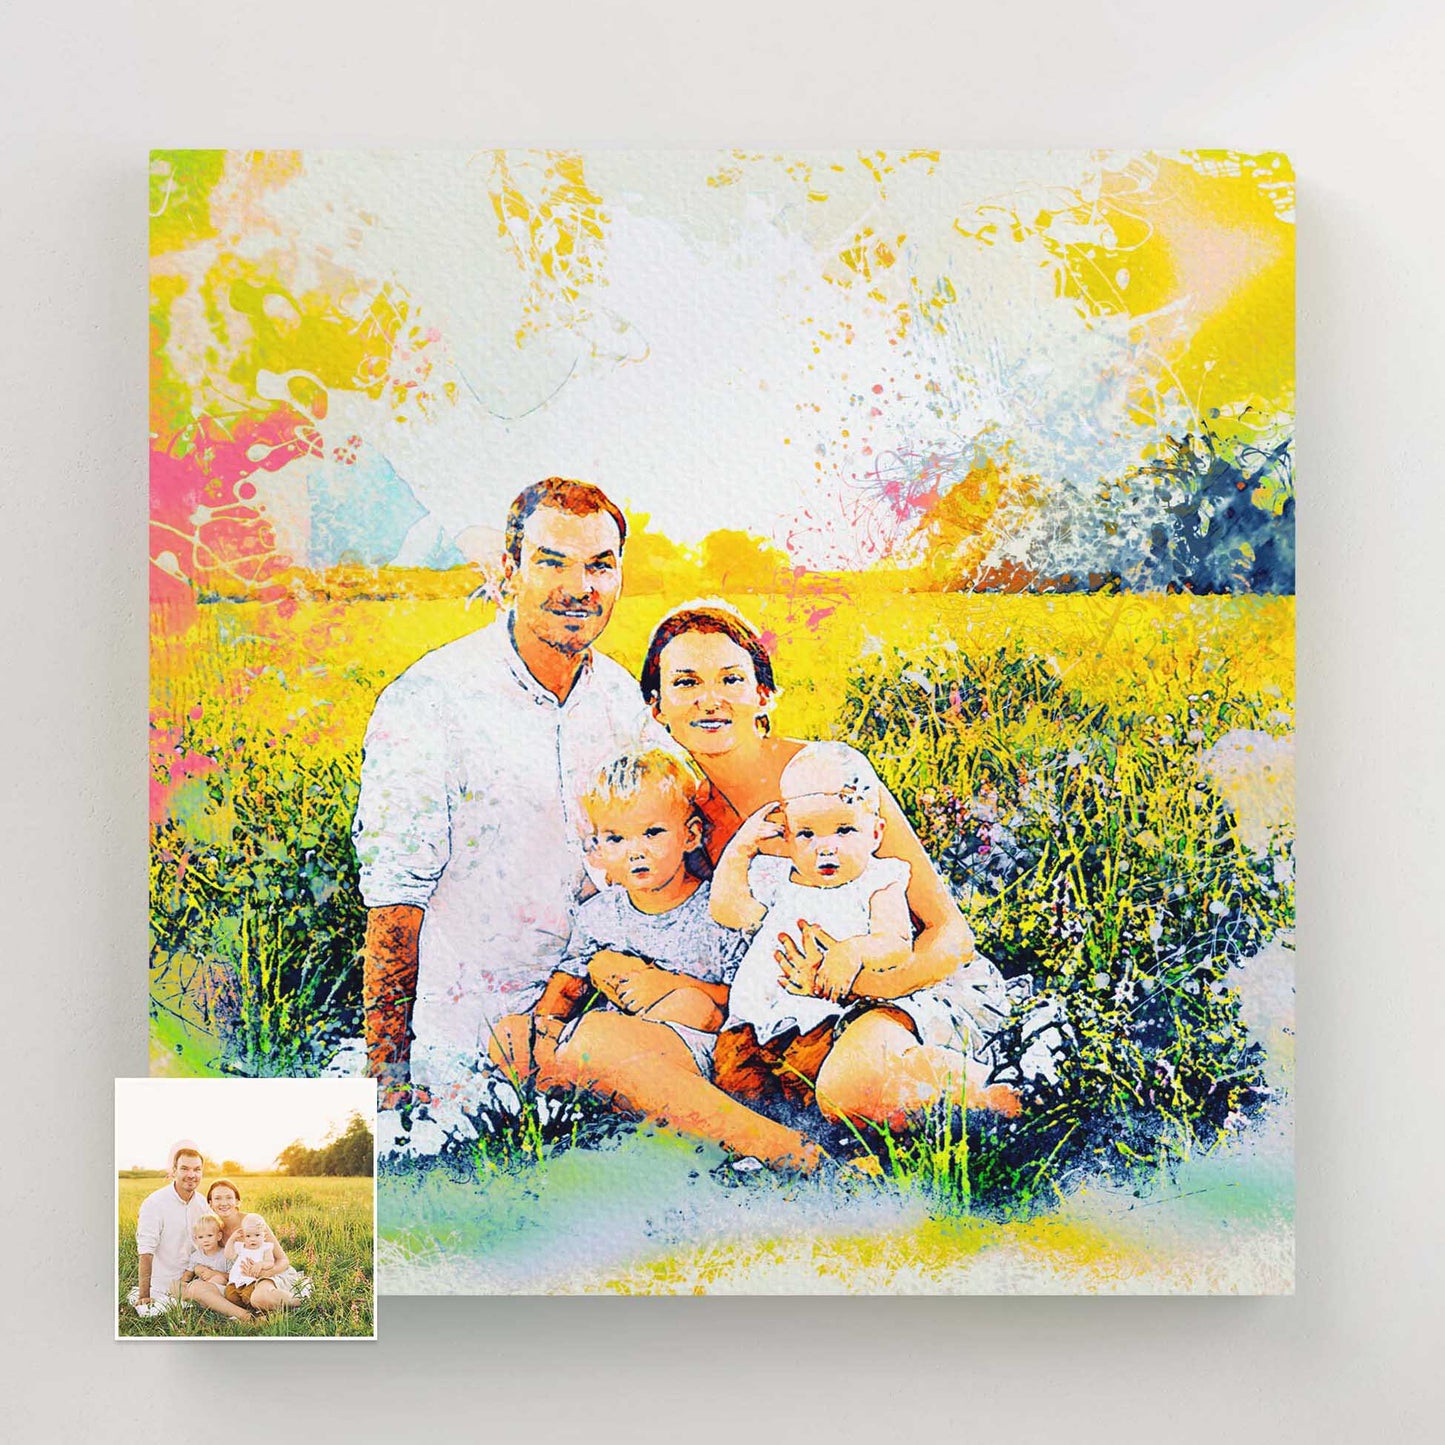 Add a splash of happiness to your walls with a personalized Splash Watercolor Canvas